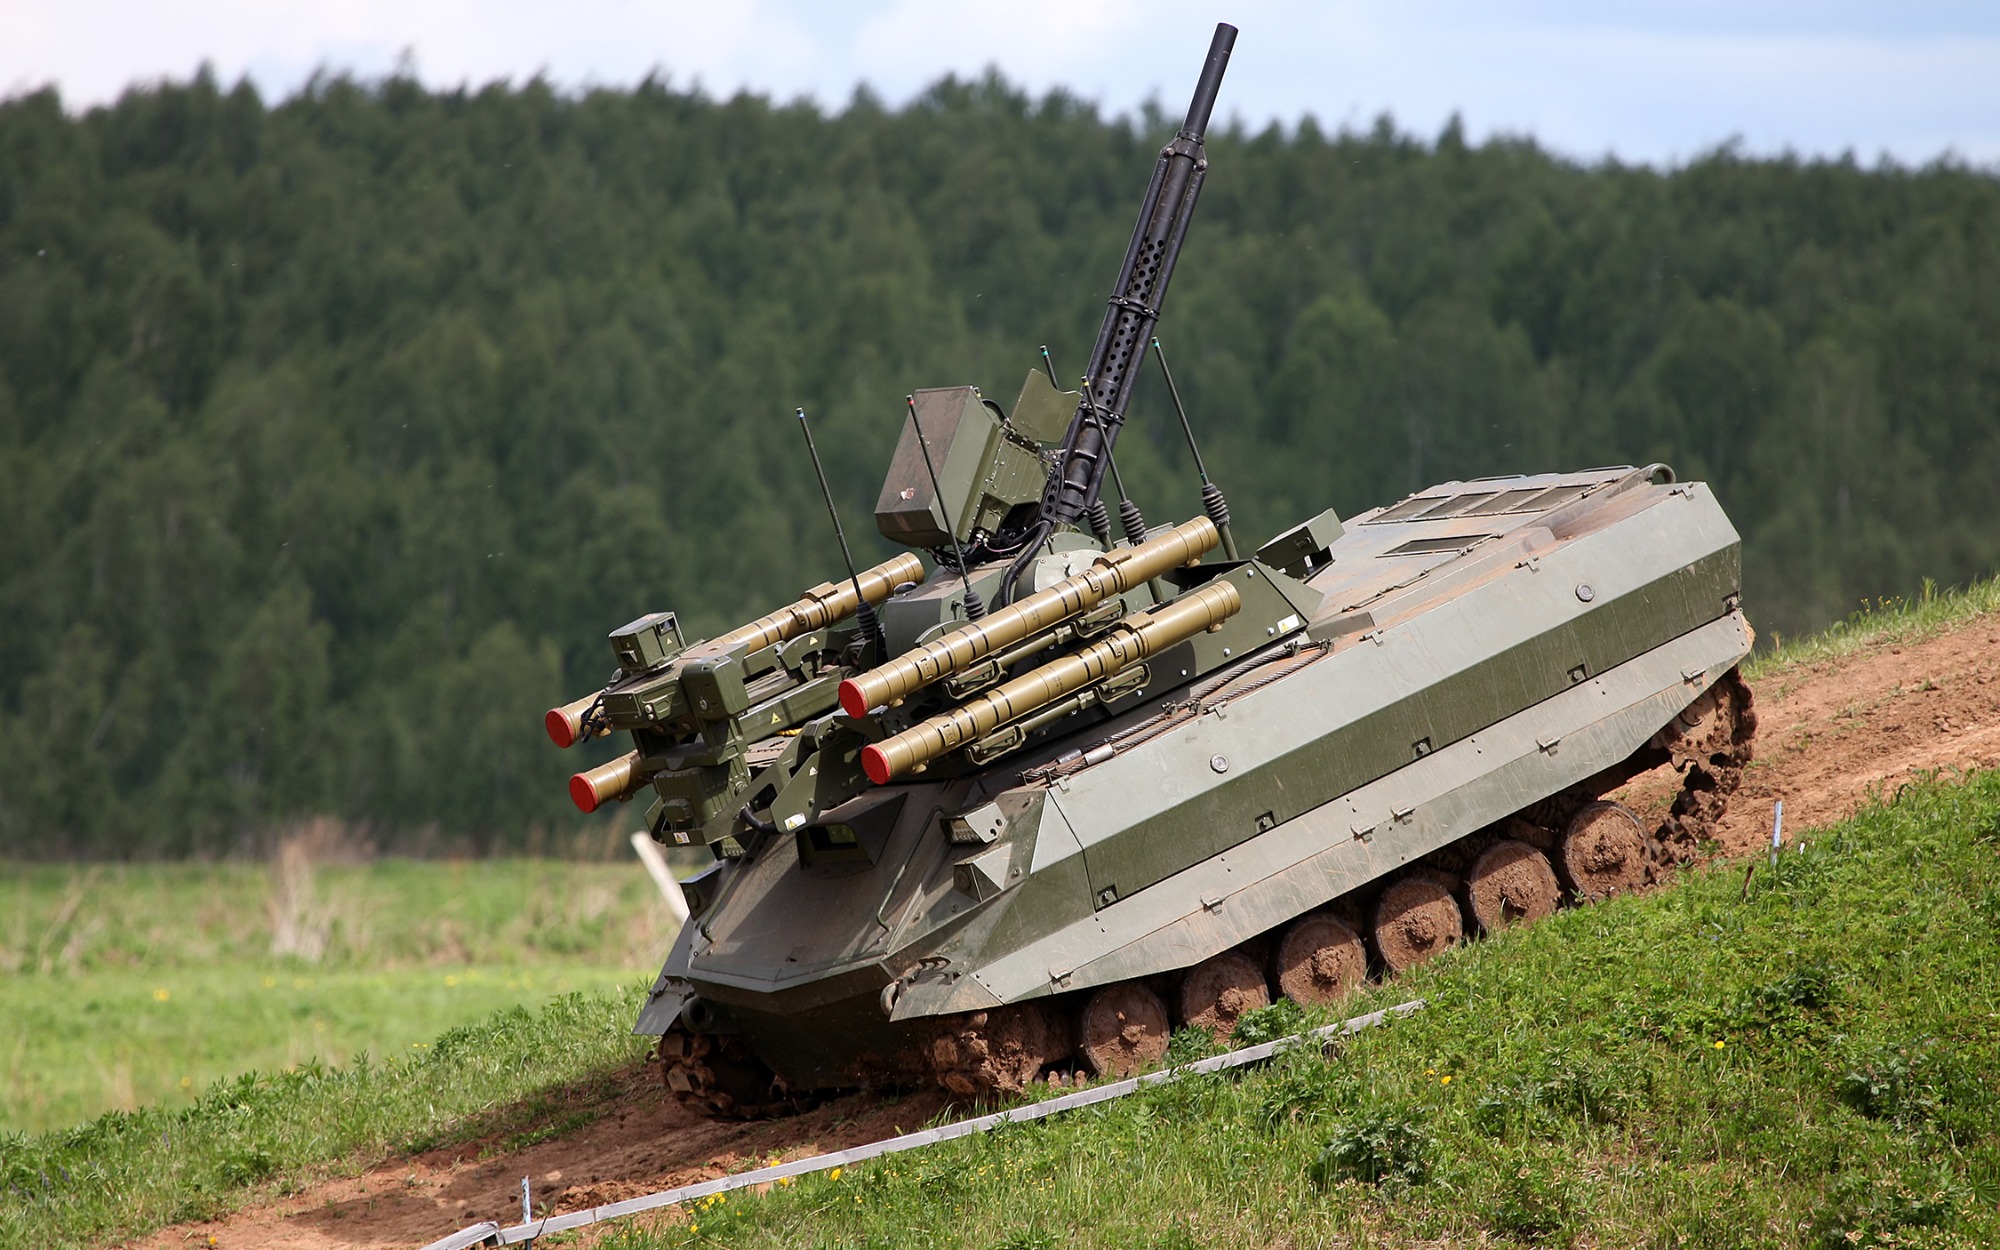 Russia to Hold Firing Tests of Its Combat Robot